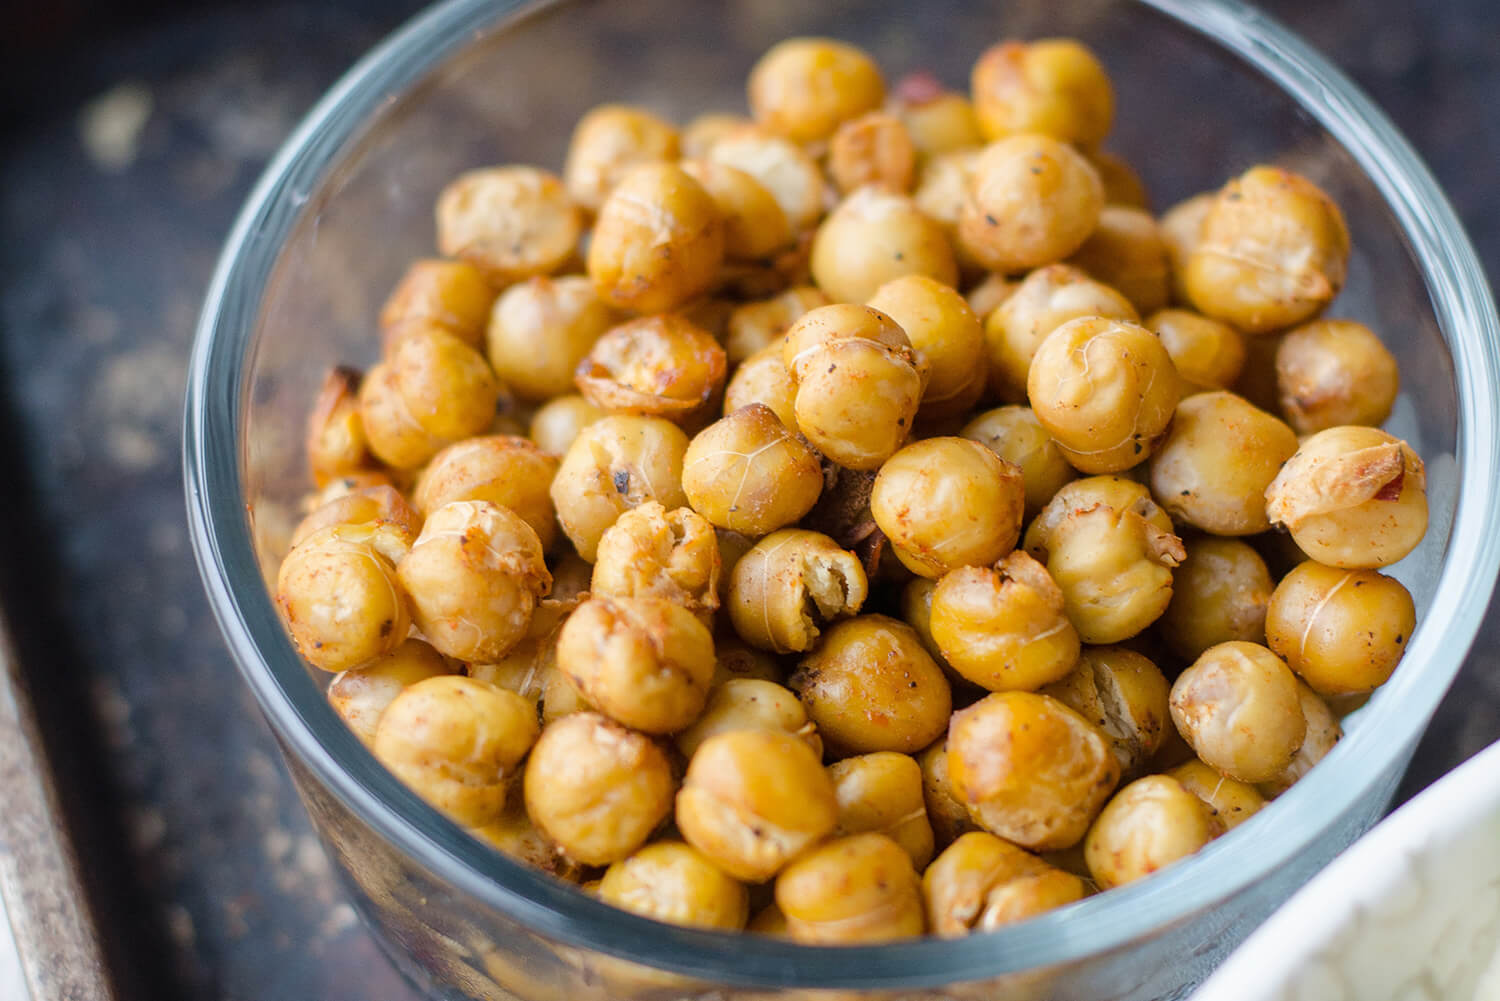 Can Dogs Eat Chickpeas? Let's Find Out 